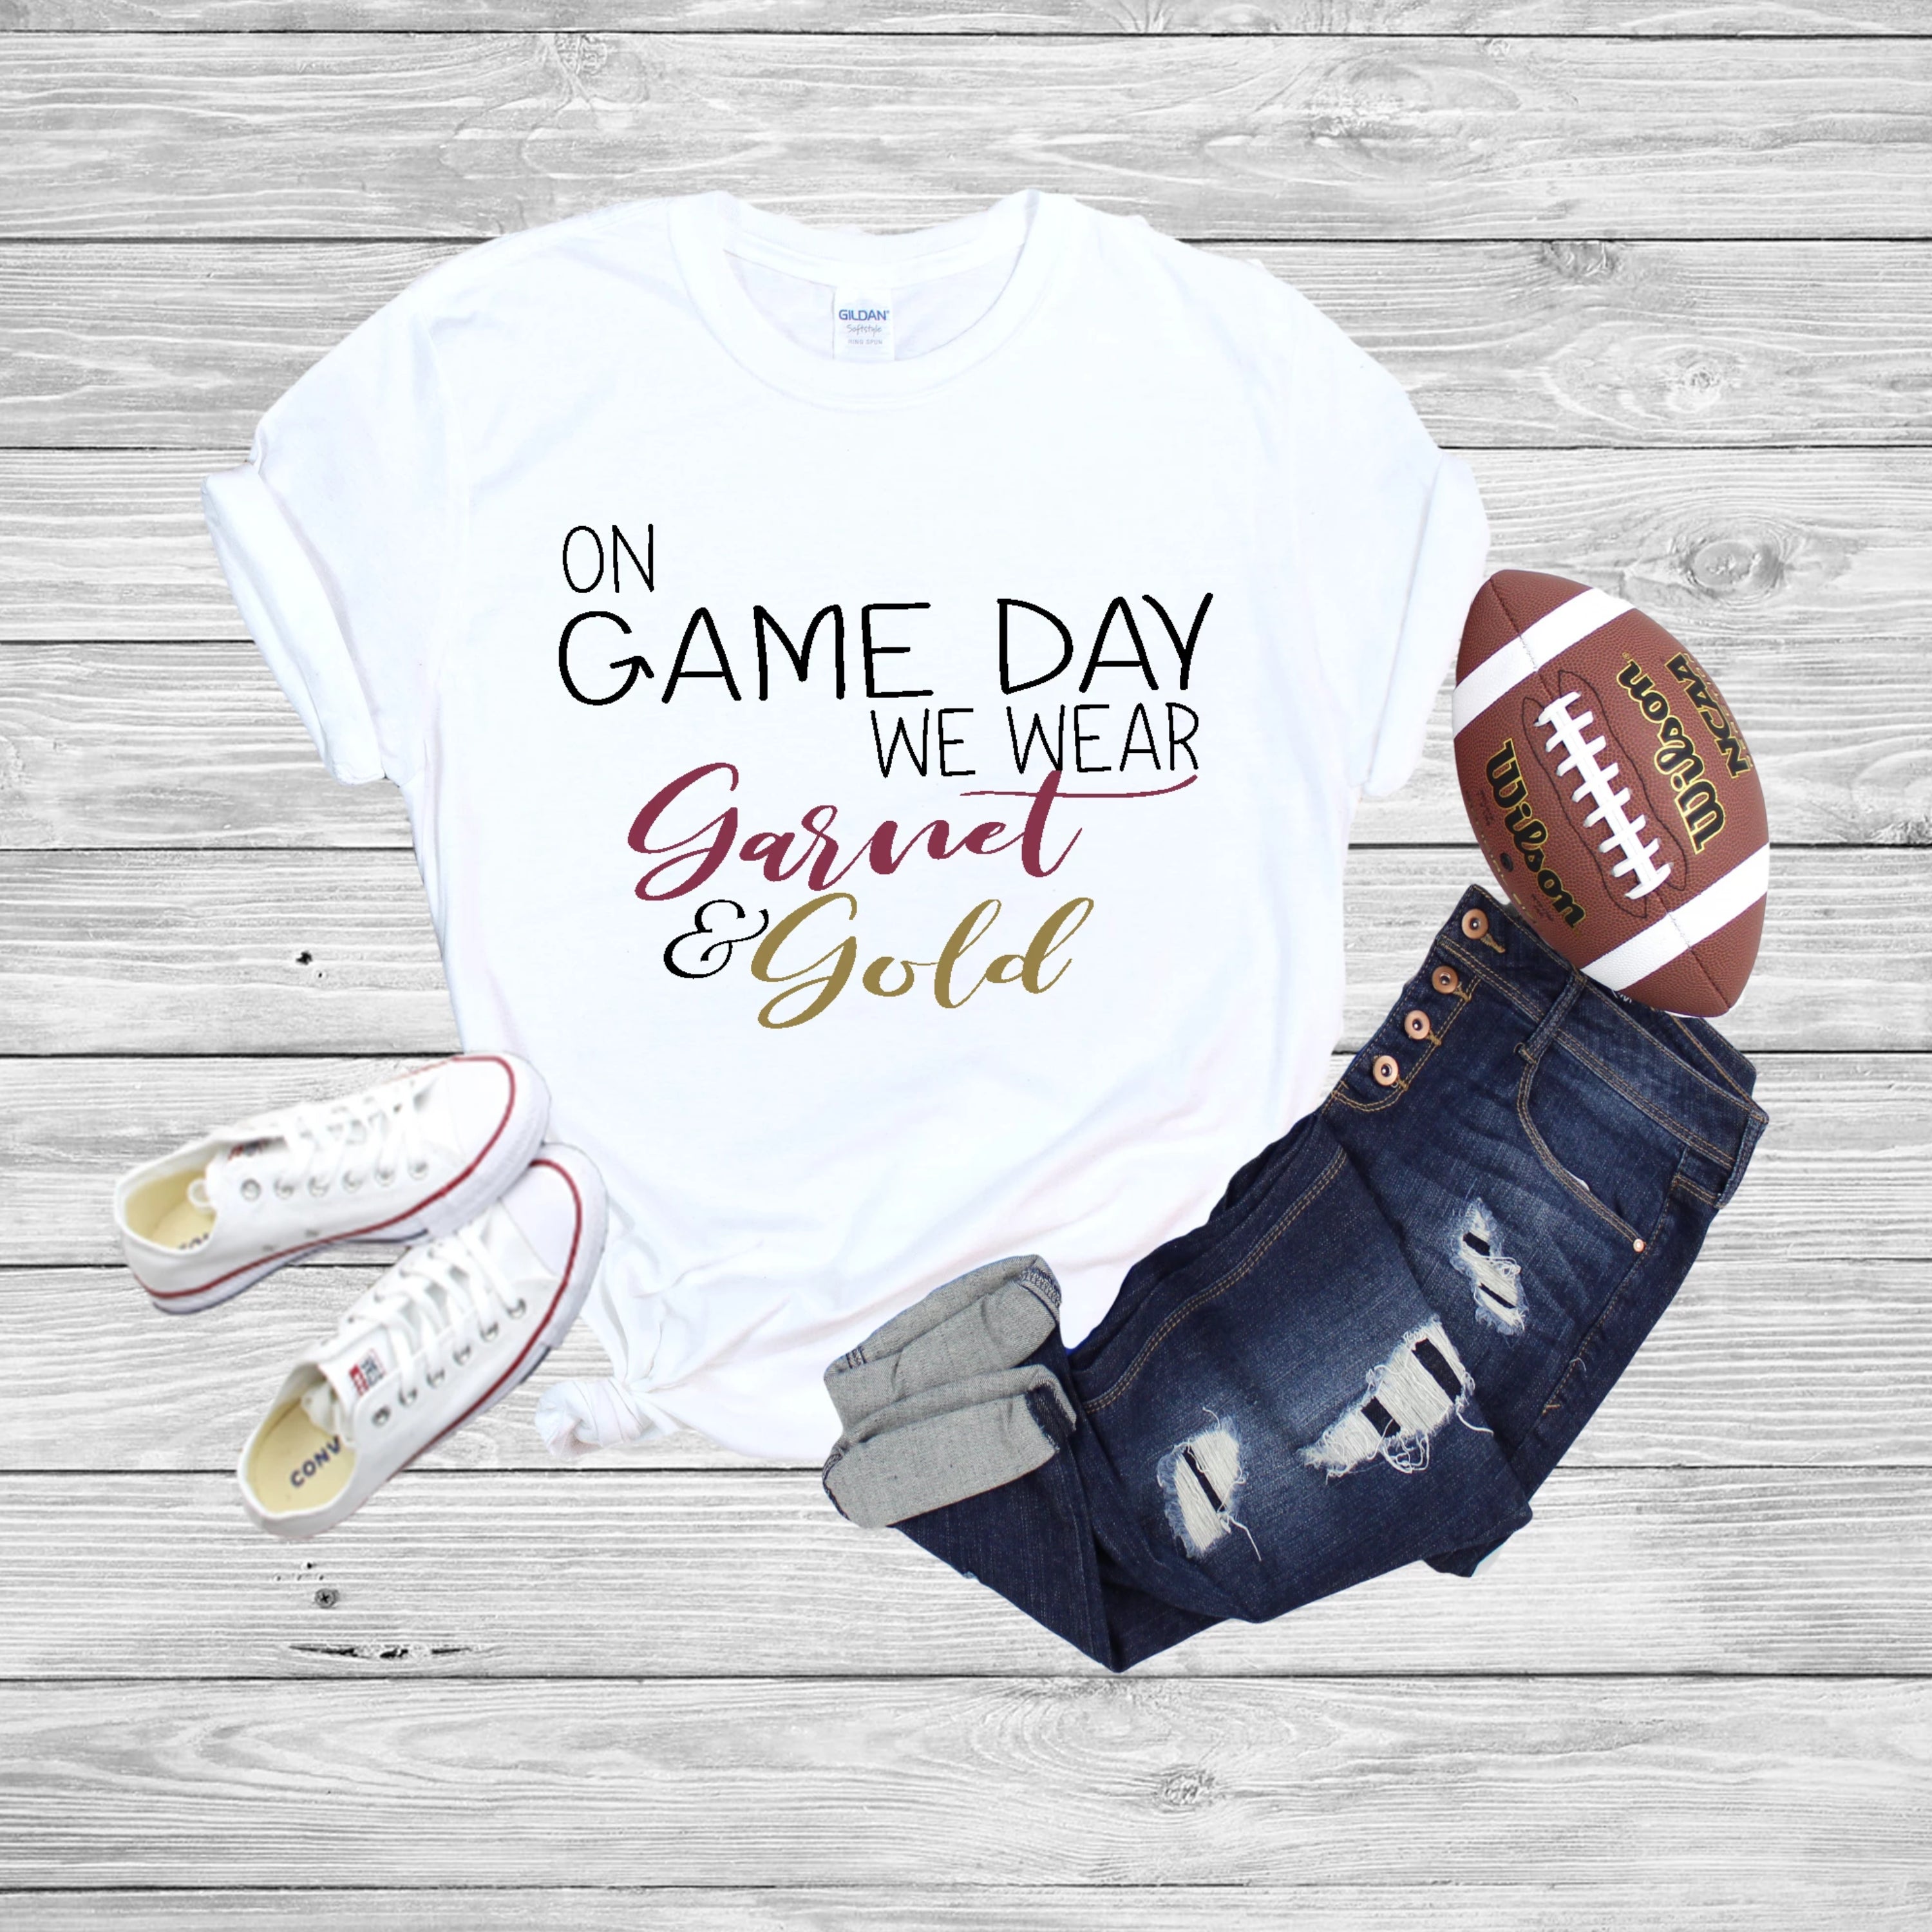 On Gameday We Wear Garnet & Gold T-Shirt - Southern Ivy Boutique